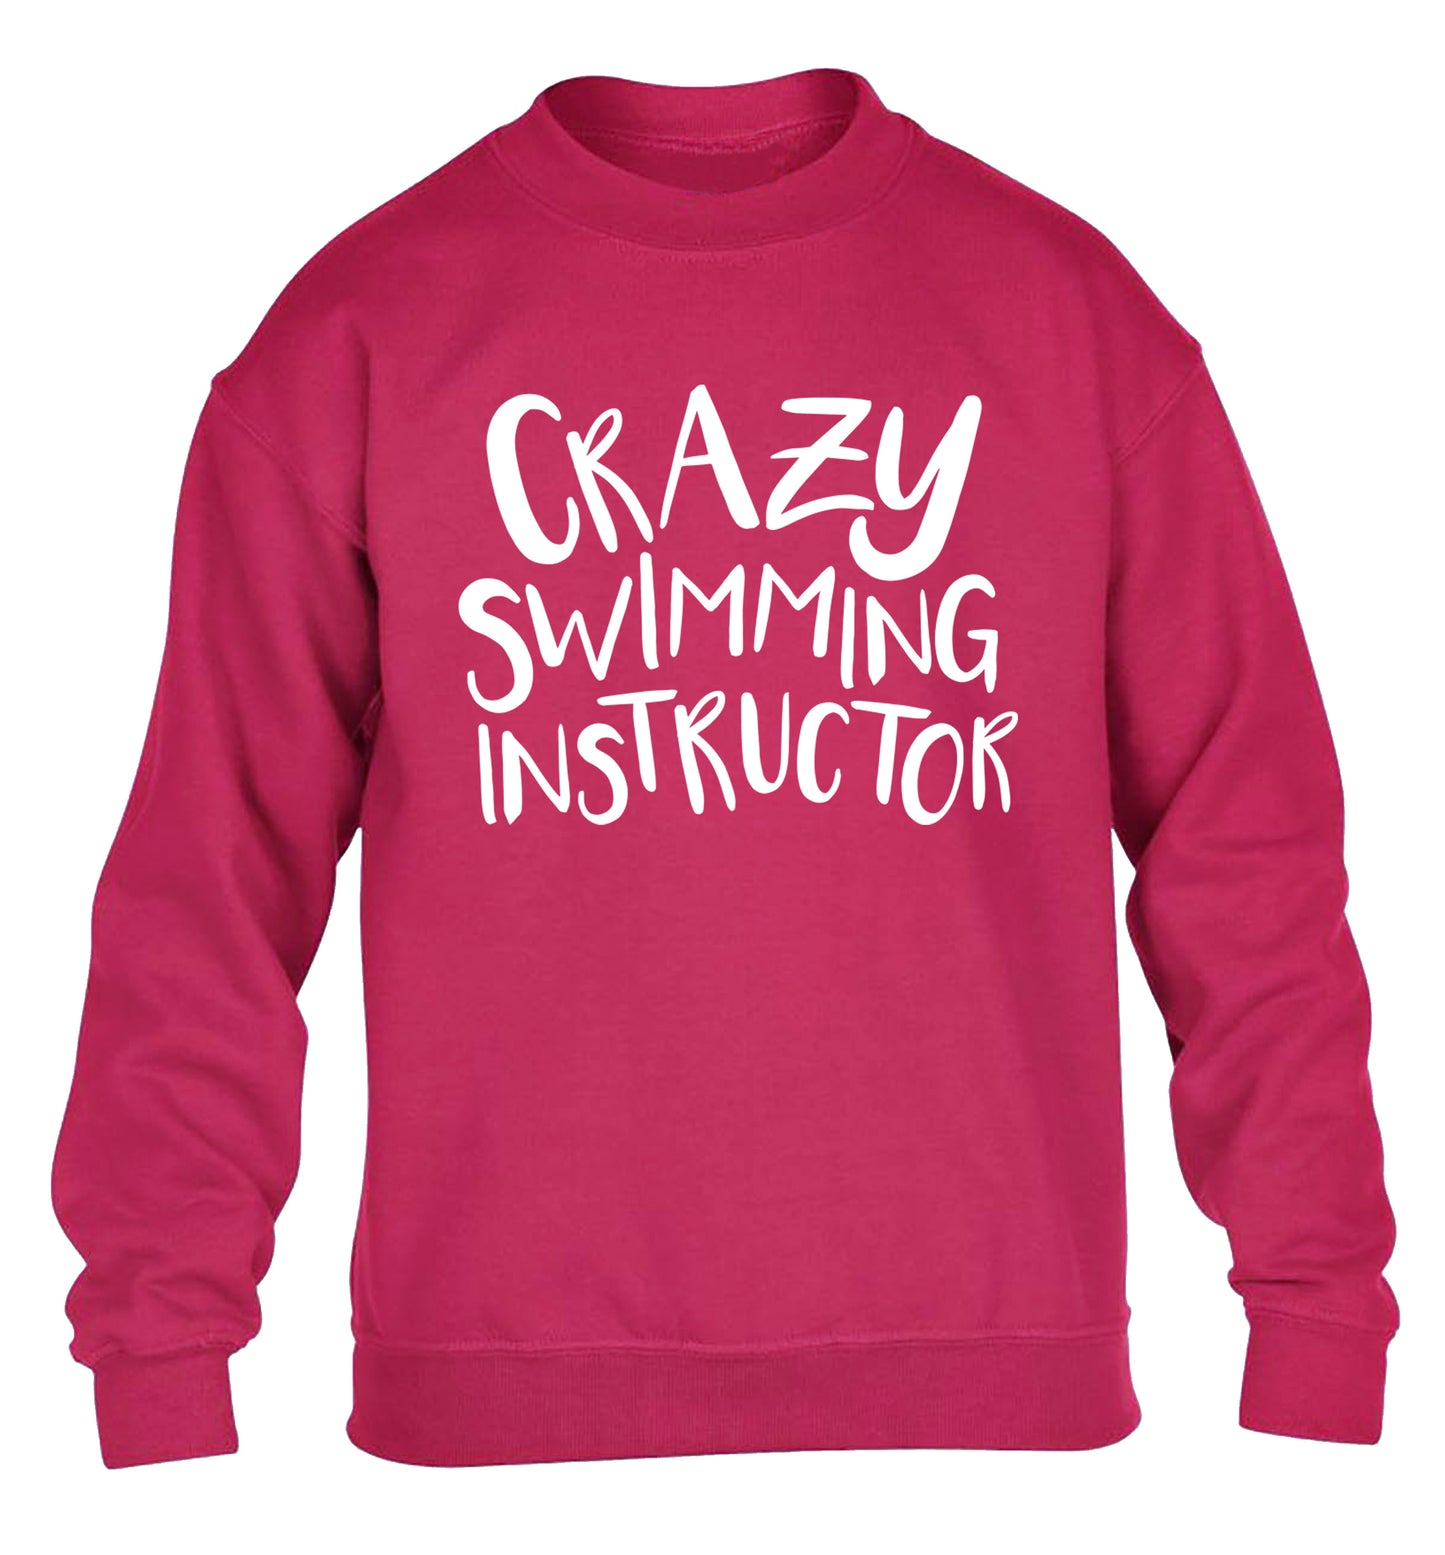 Crazy swimming instructor children's pink sweater 12-13 Years